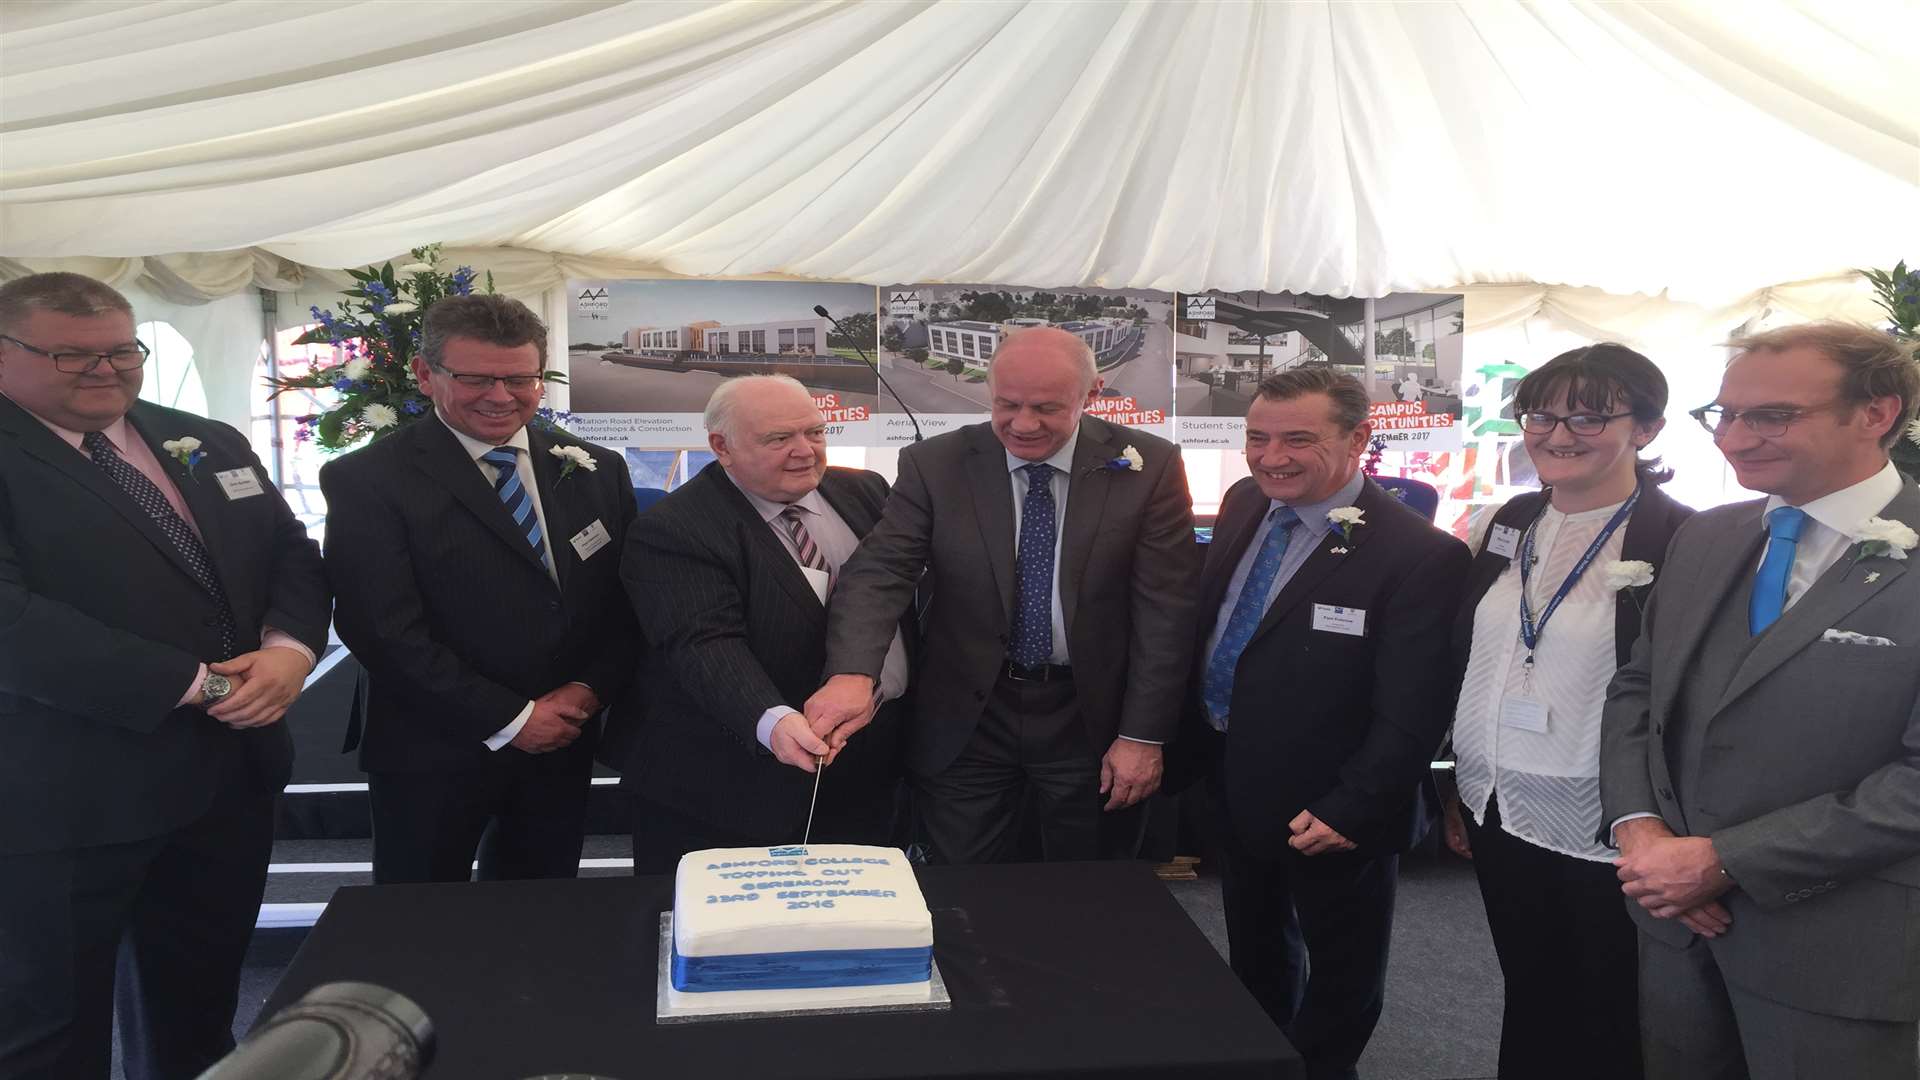 Cllr Gerry Clarkson and MP Damian Green cut the cake with the Hadlow Group and BAM Construction teams.